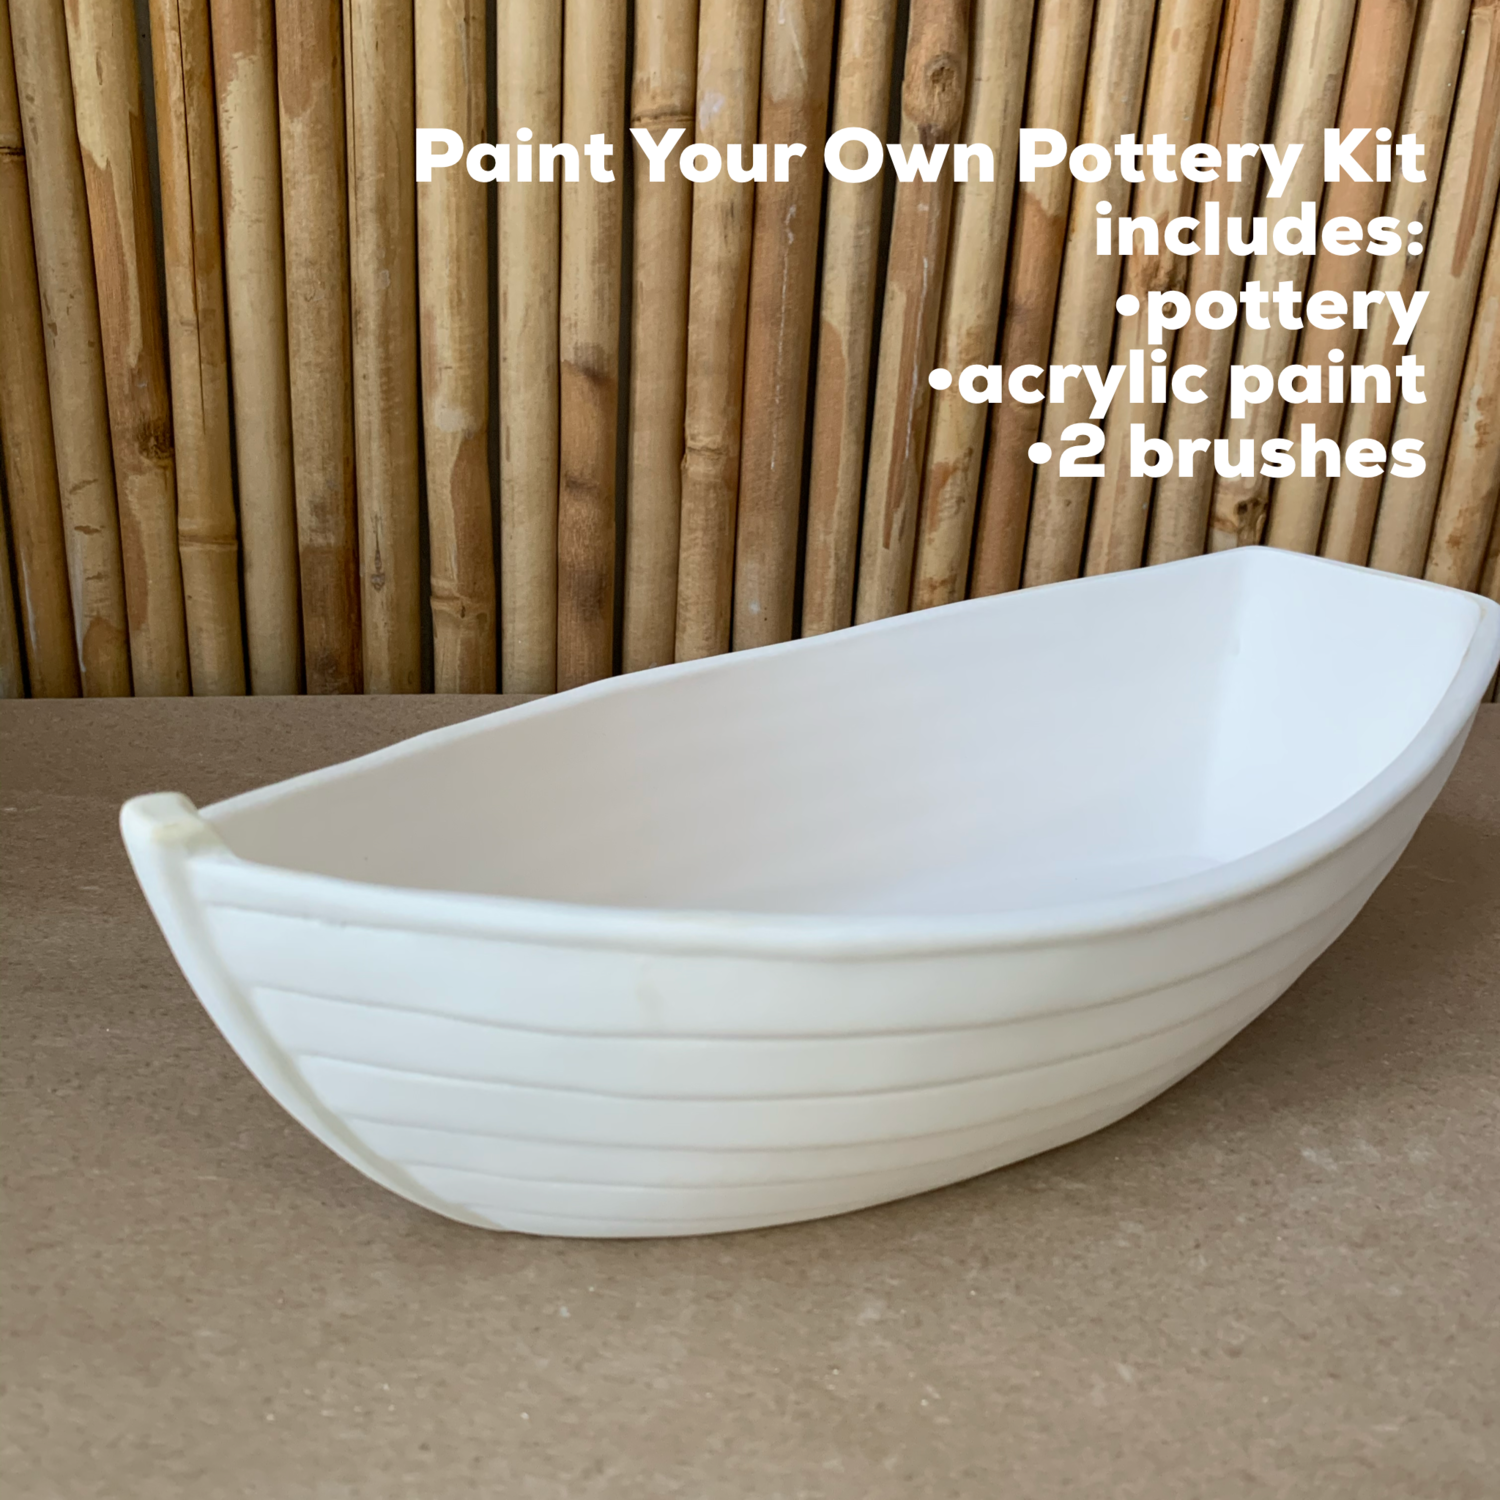 NO FIRE Paint Your Own Pottery Kit -
Ceramic Lifeguard Boat Acrylic Painting Kit